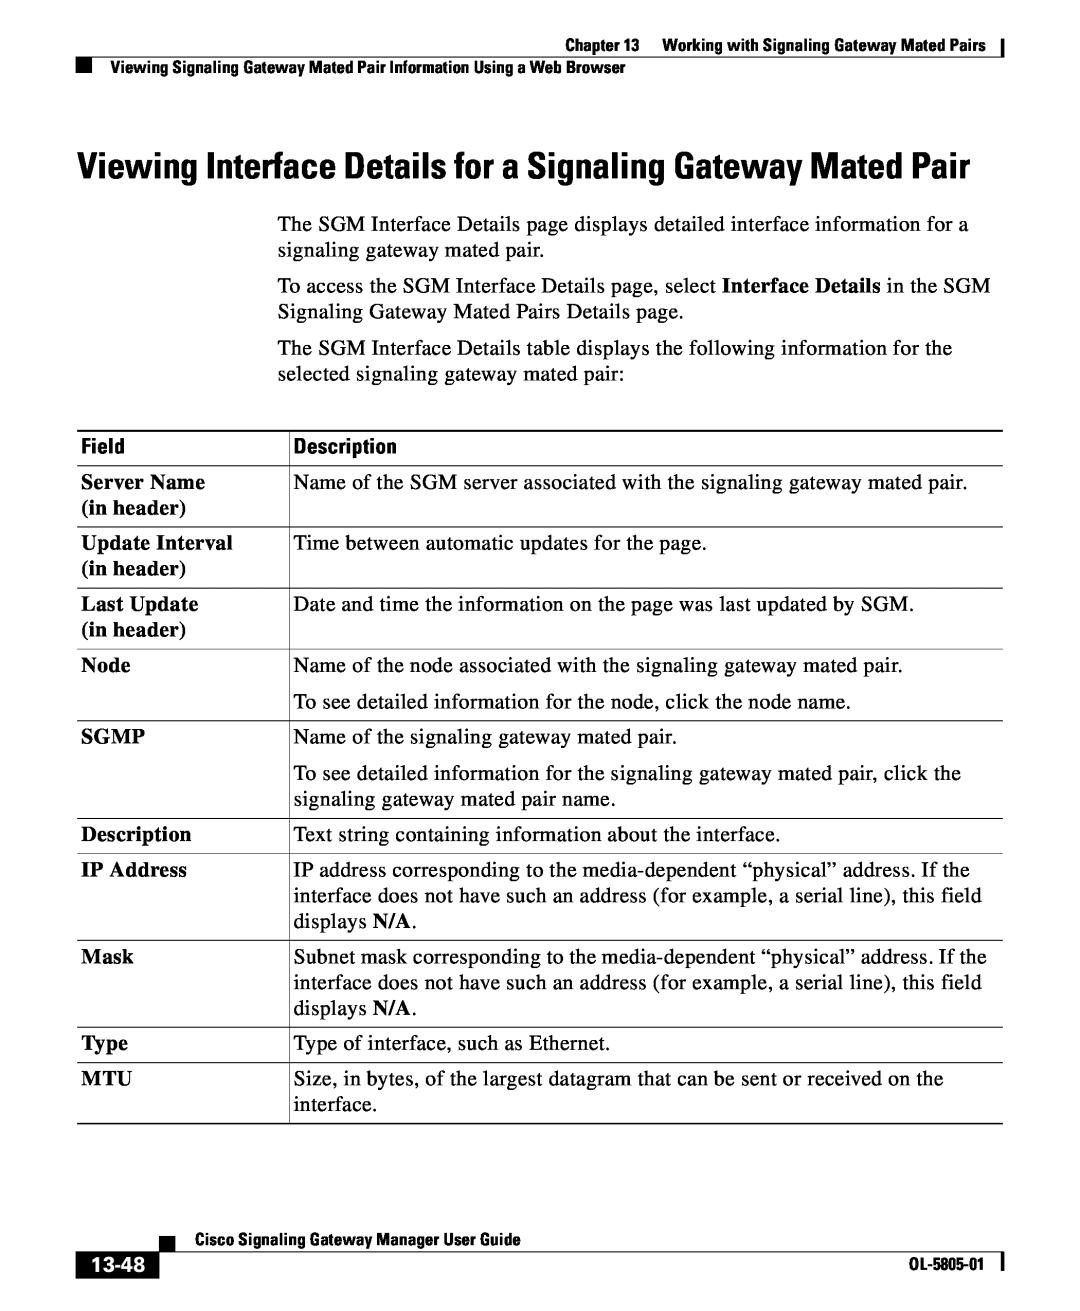 Cisco Systems OL-5805-01 manual Viewing Interface Details for a Signaling Gateway Mated Pair, 13-48, Field, Description 